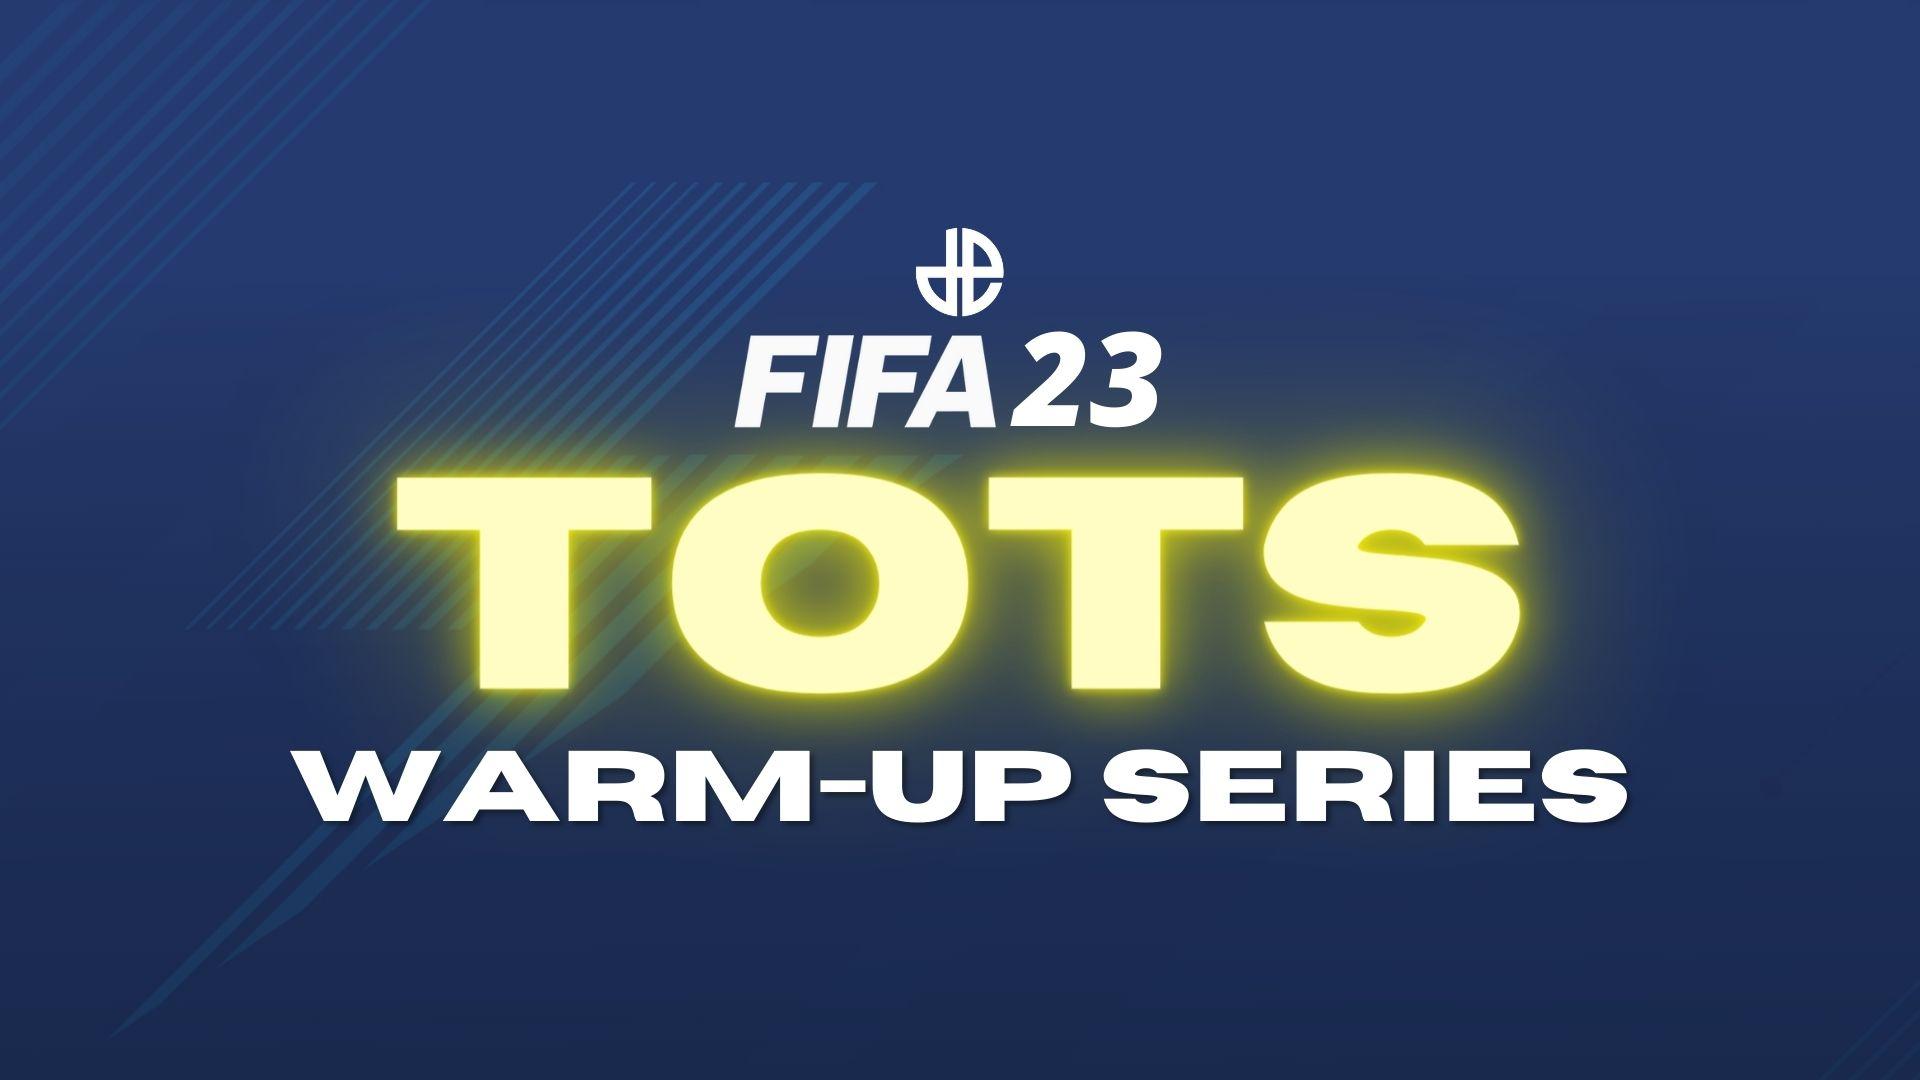 FIFA 23 TOTS warm-up series text and logo